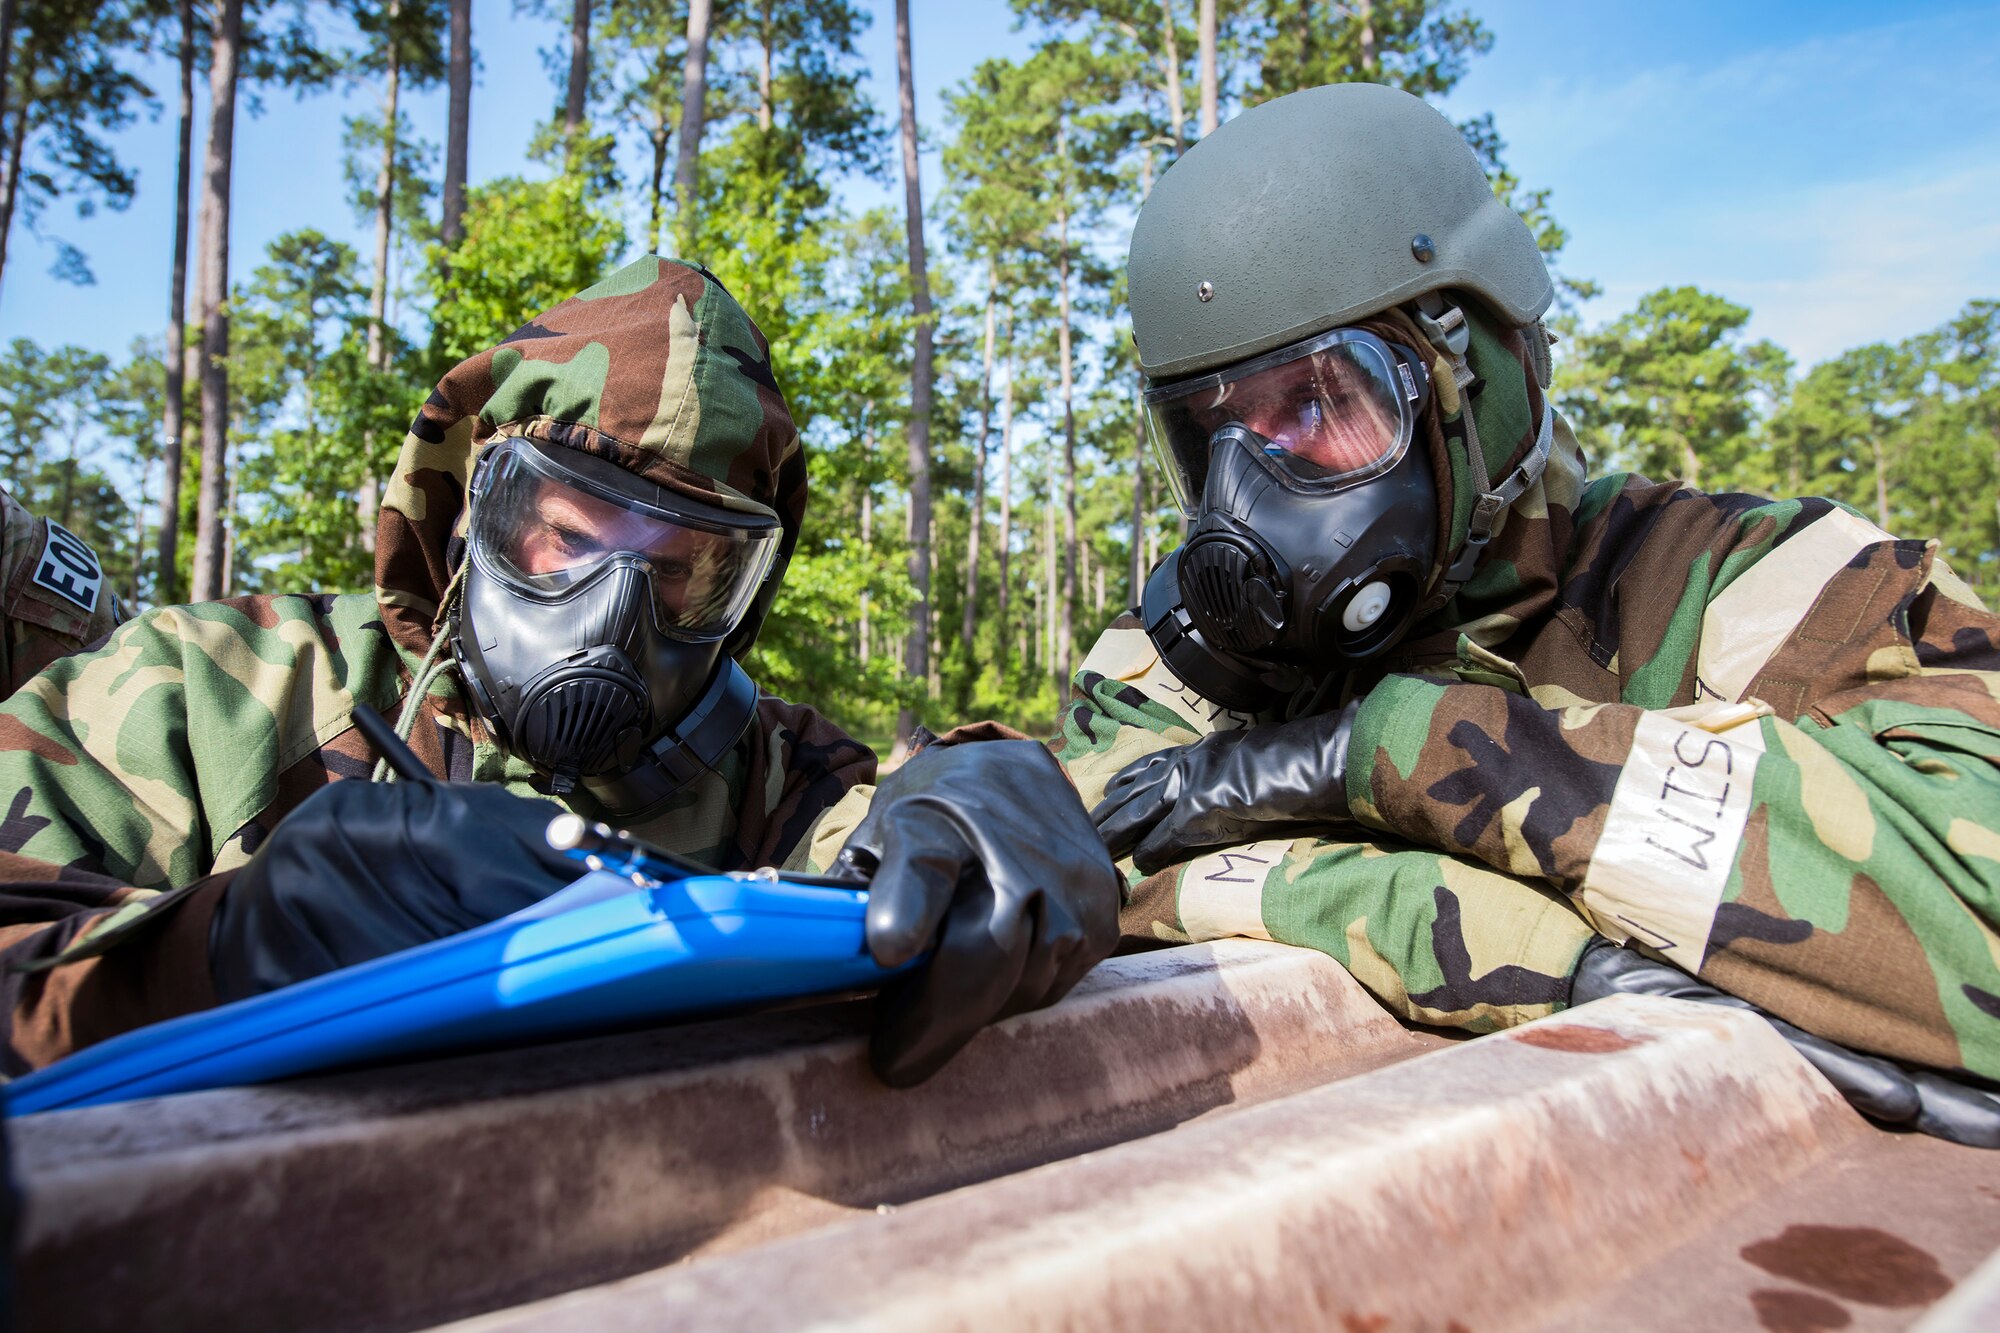 Airmen from the 23d Civil Engineer Squadron, take notes during a chemical, Biological, Radiological, Nuclear and Explosive (CBRNE) Olympics, June 21, 2018, at Moody Air Force Base, Ga.   Moody held its first CBRNE Olympics to further Airmen’s overall knowledge on all of the aspects of CBRNE through a new method that was meant to establish a sense of competition and camaraderie. (U.S. Air Force photo by Airman 1st Class Eugene Oliver)